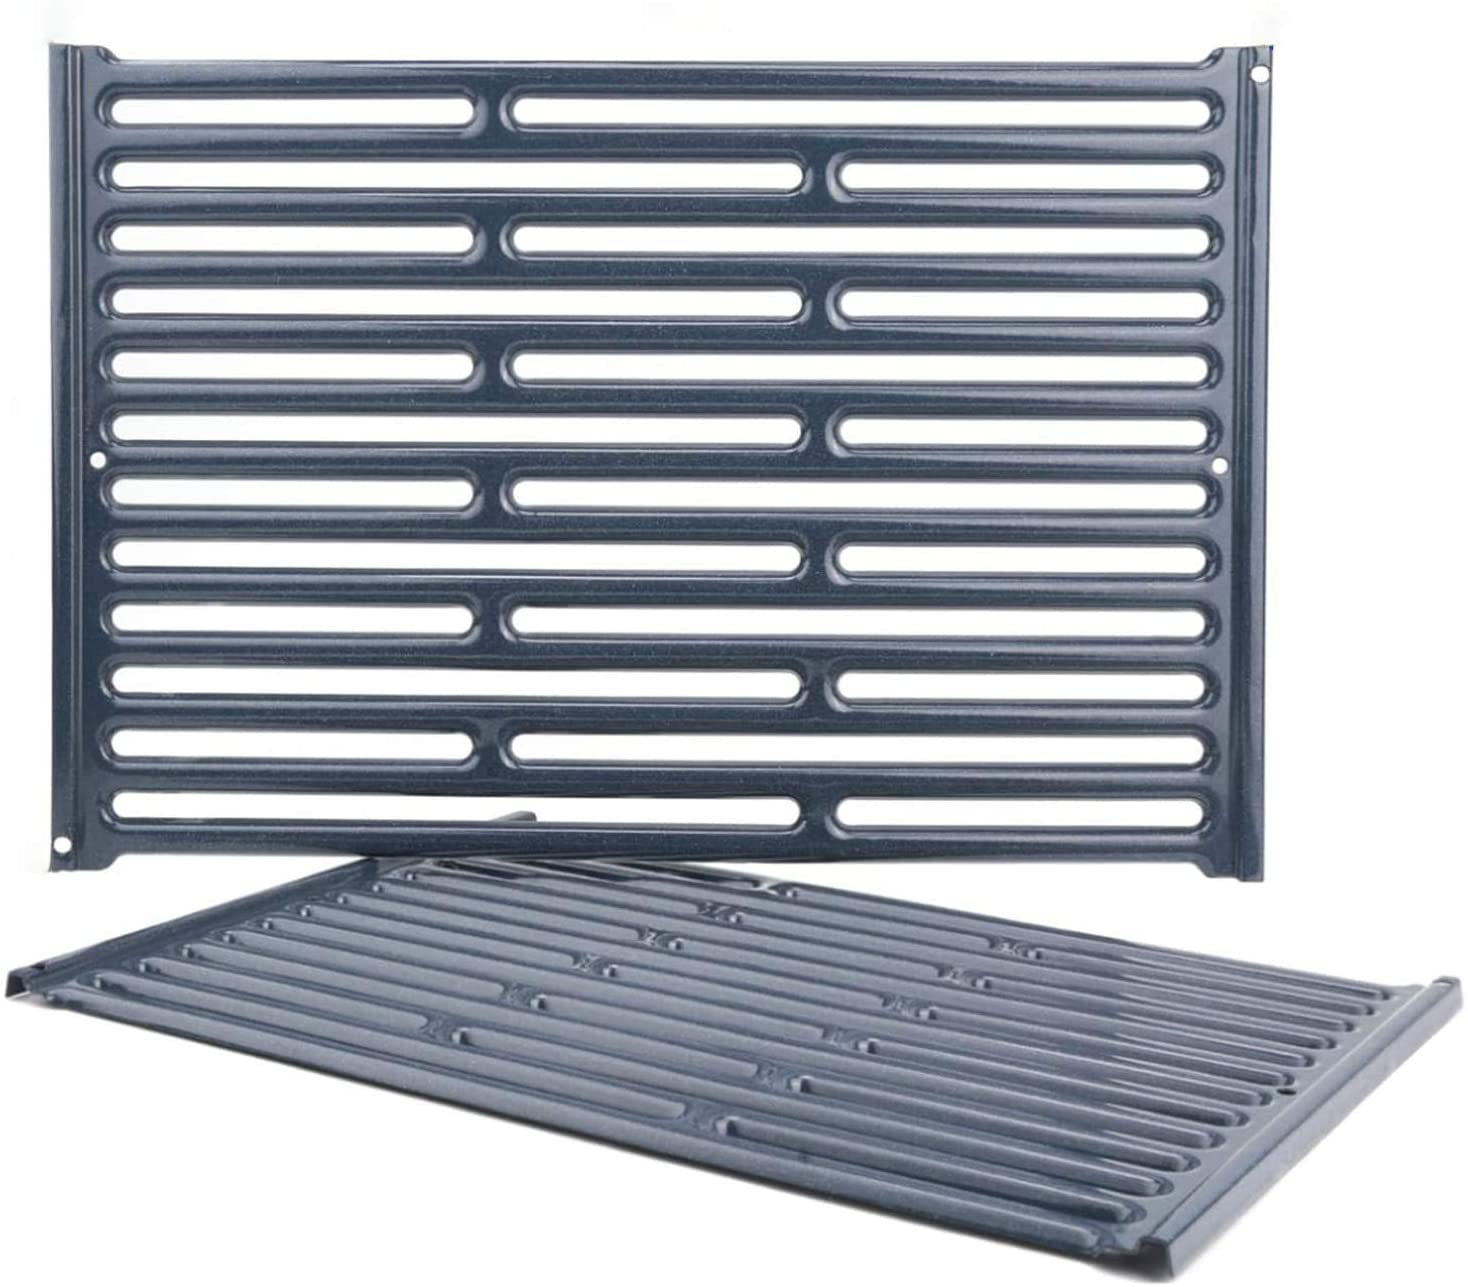 7521 Grill Grates for Weber Spasm price Spirit Series 200 500 A Silver Wholesale Genesis